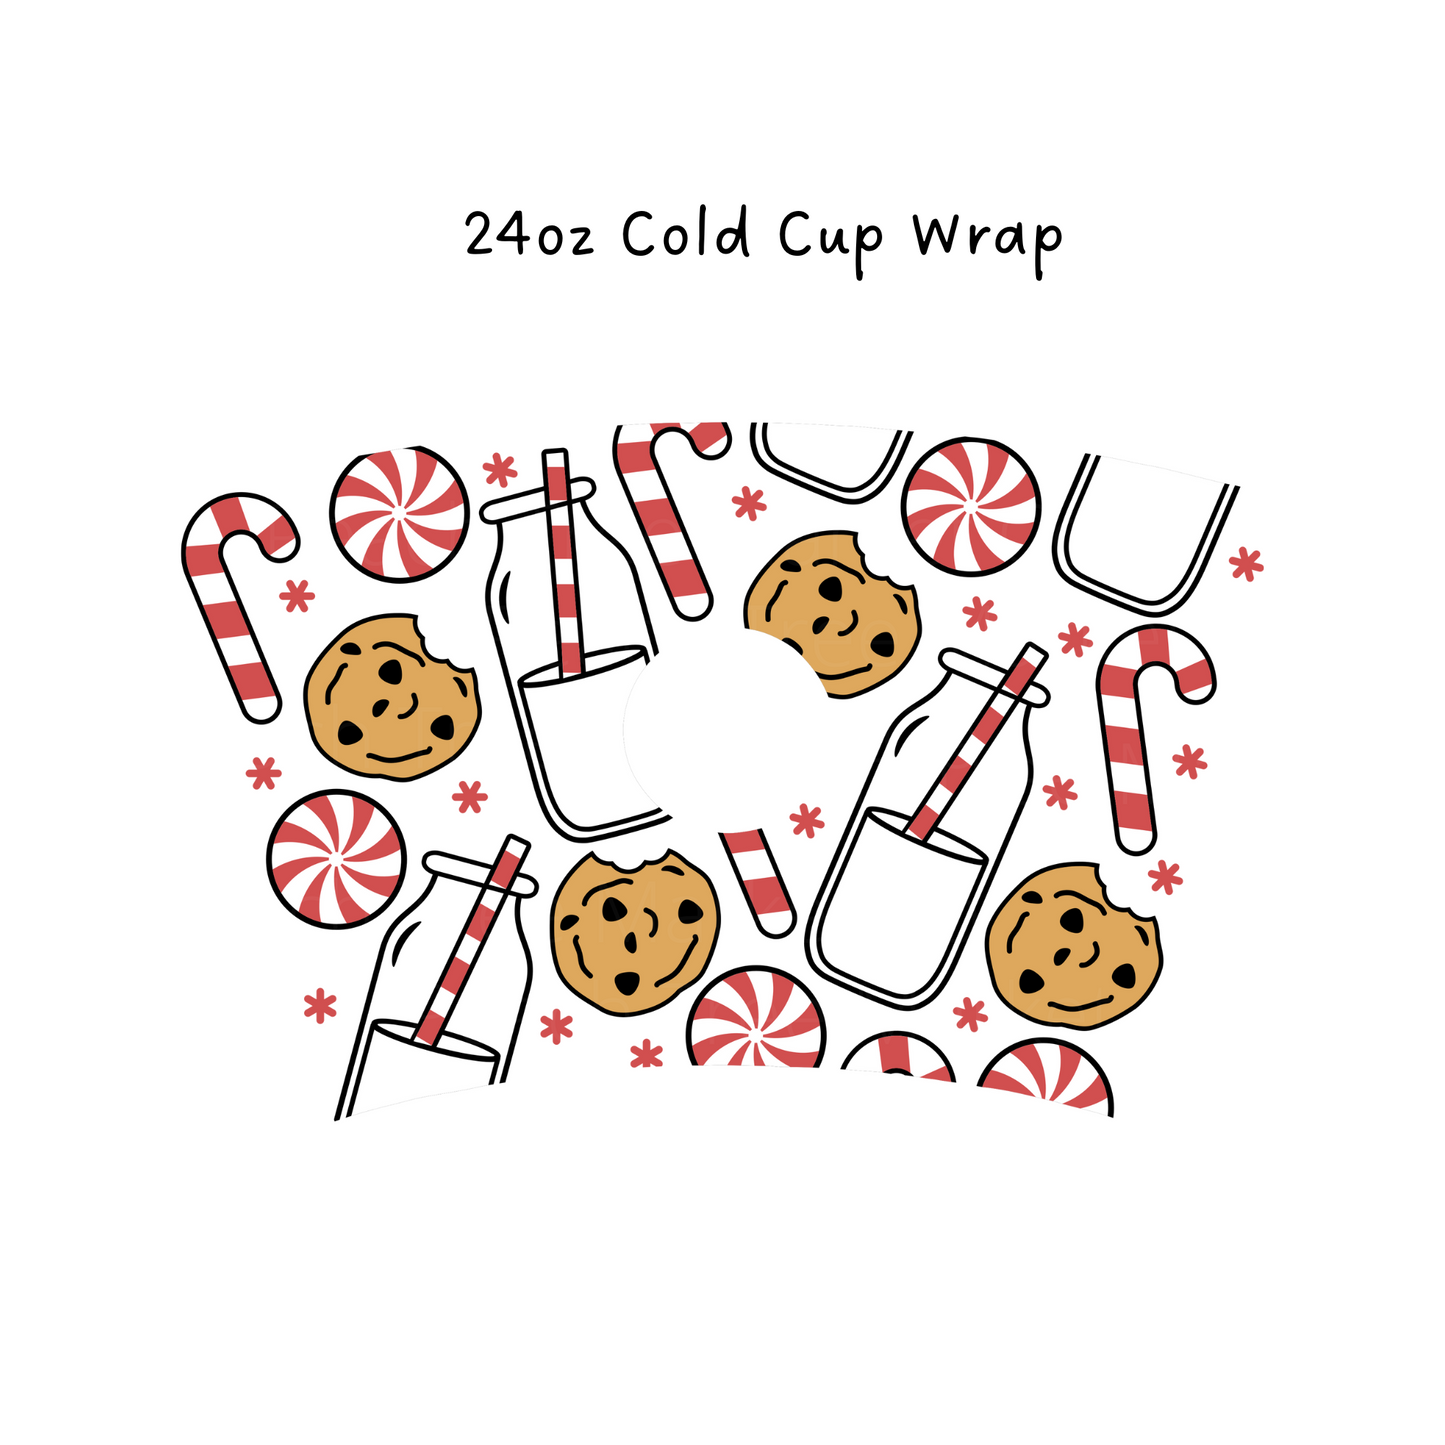 Milk and Cookies 24 OZ Cold Cup Wrap